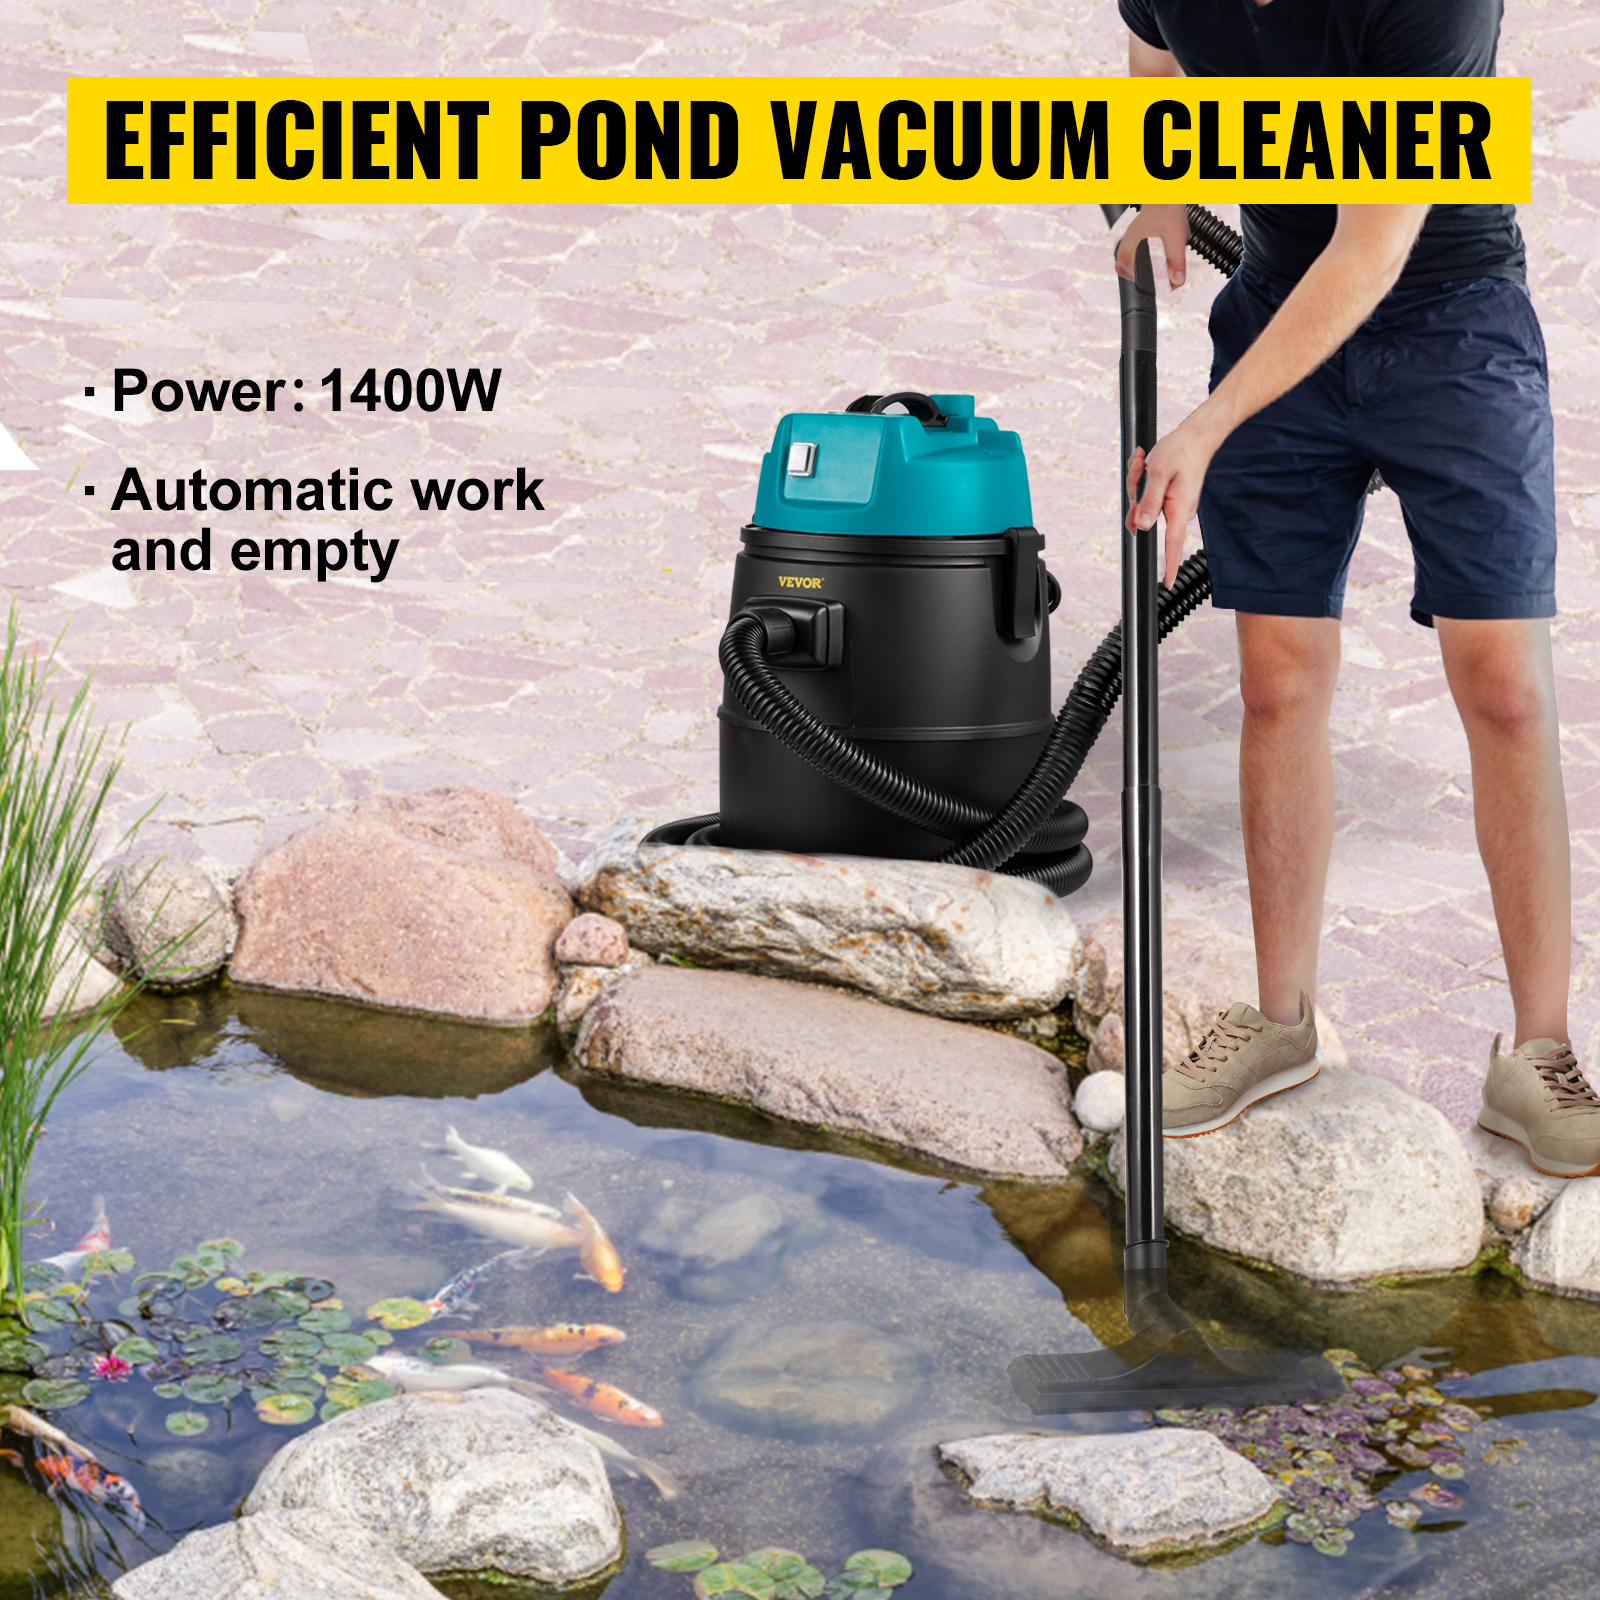 VEVOR Pond Vacuum Cleaner, 1400W Motor in Single Chamber Suction